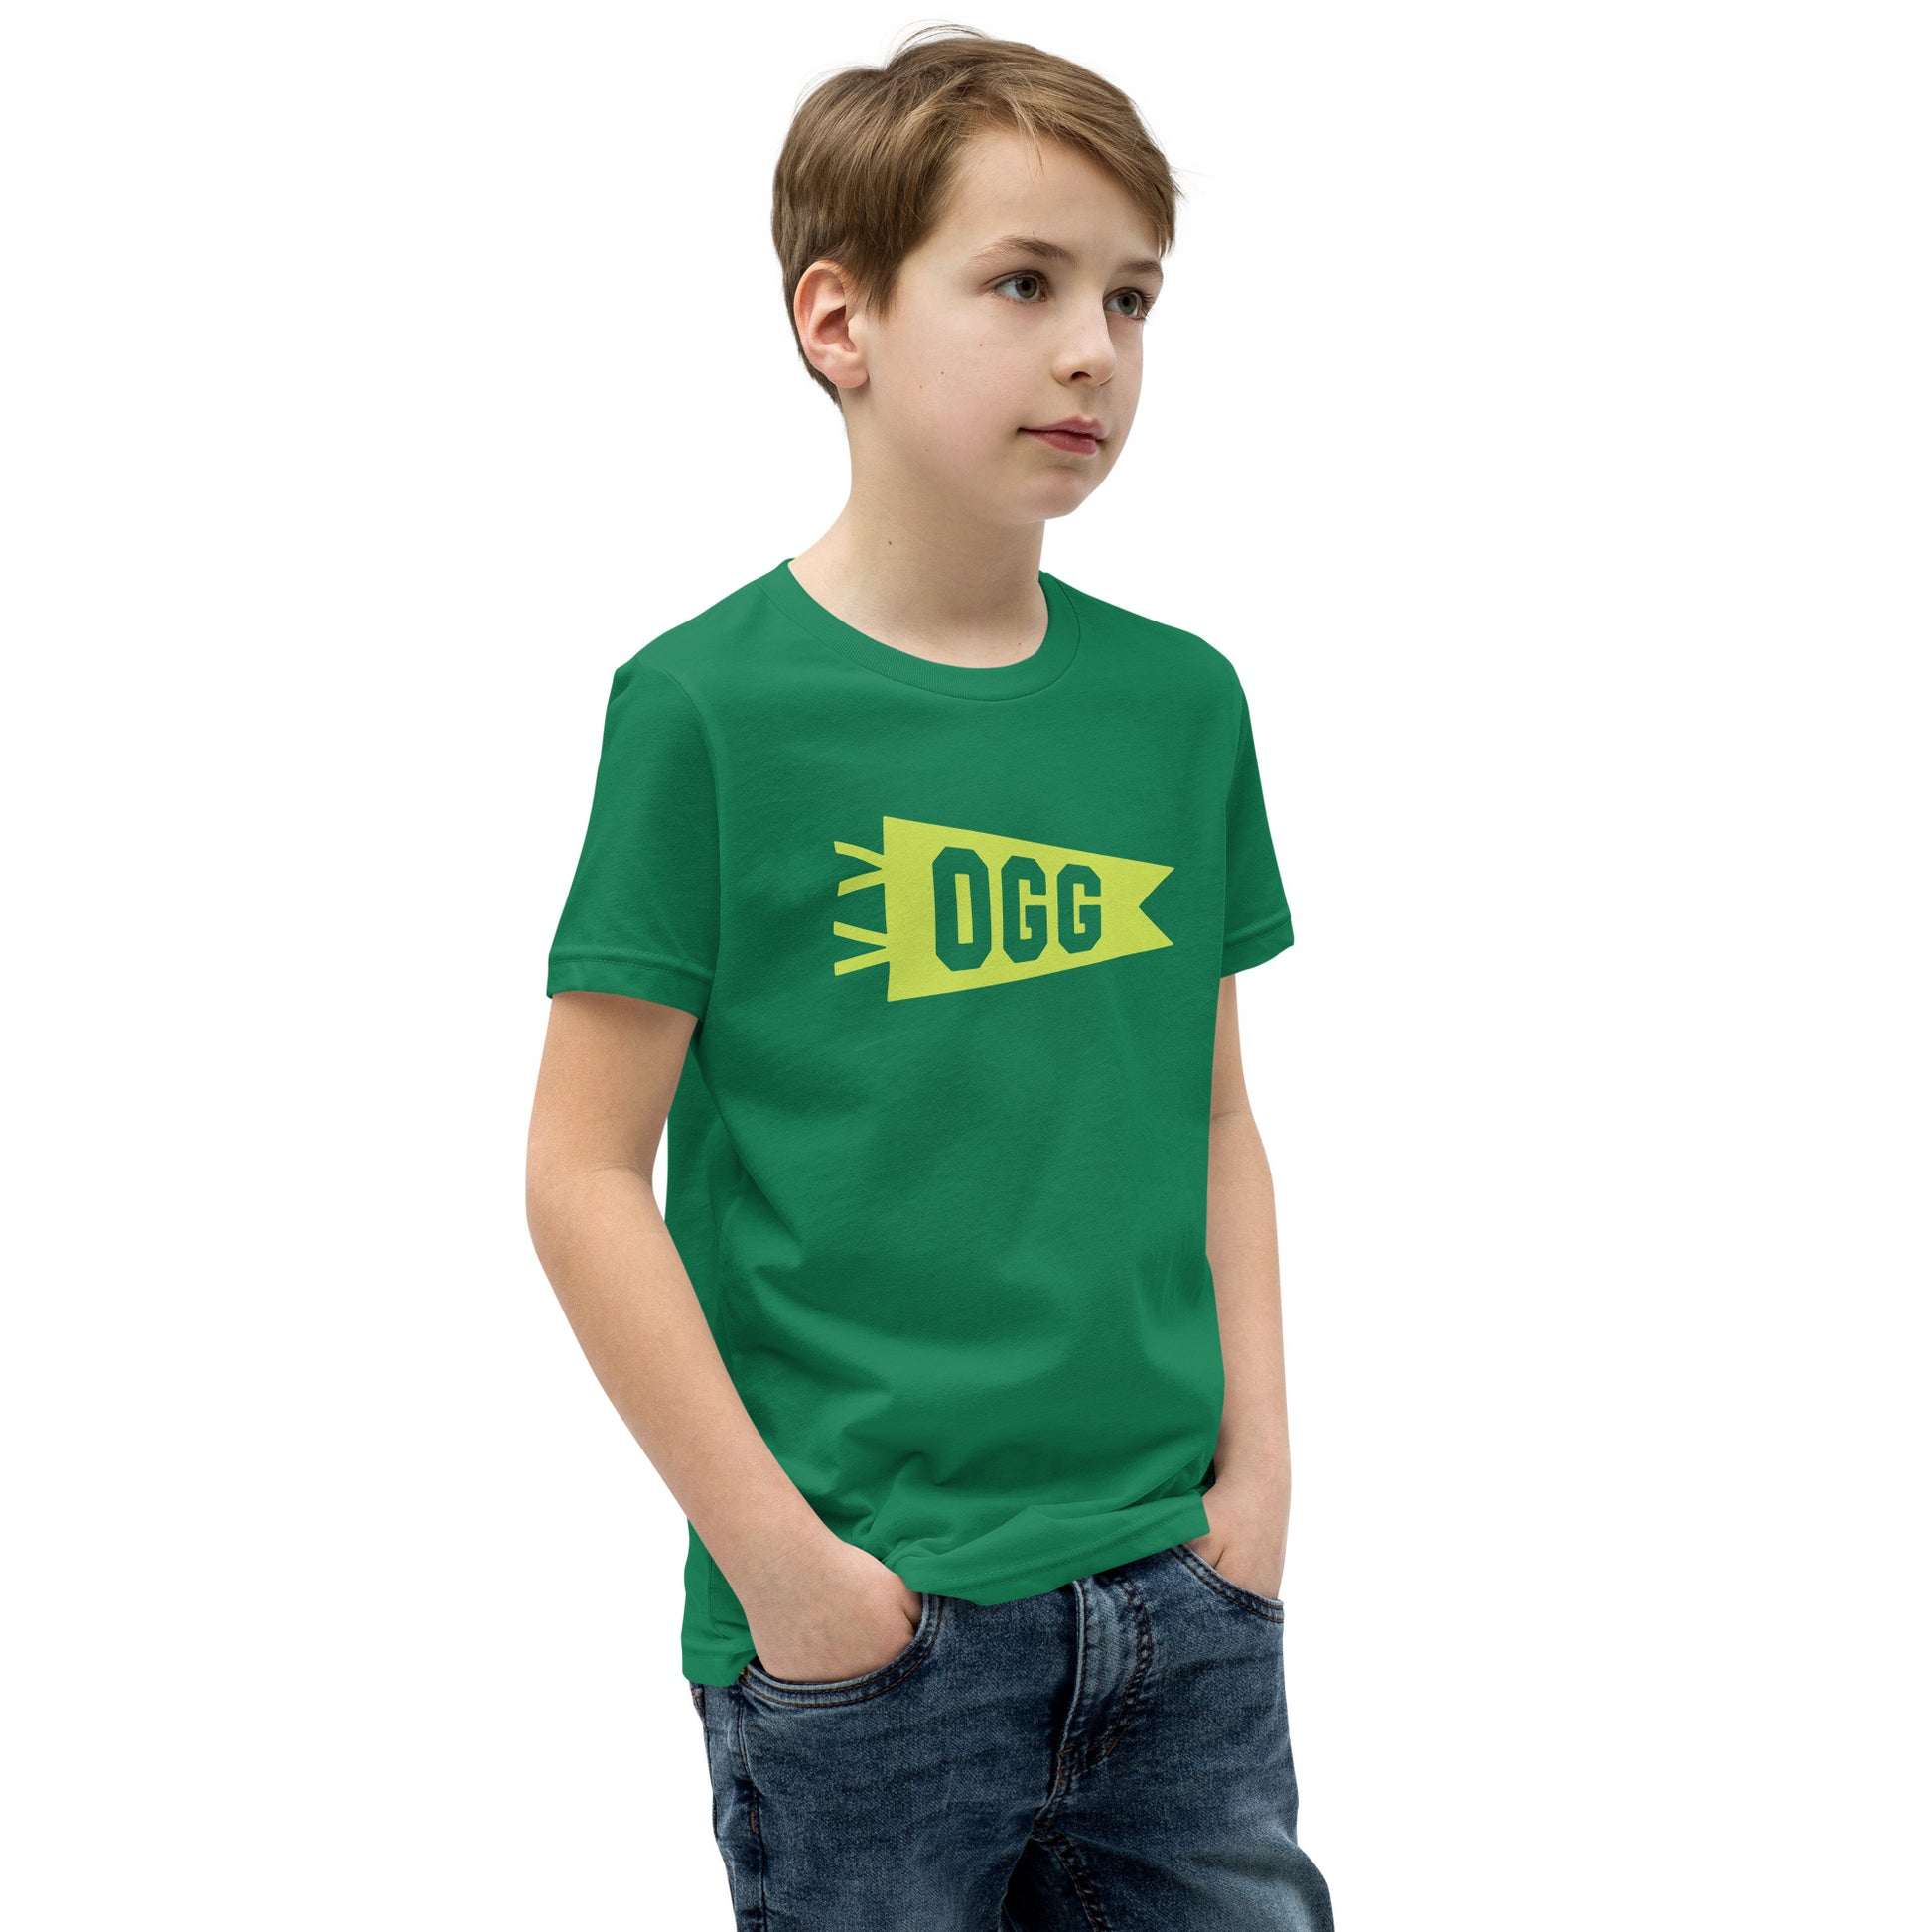 Kid's Airport Code Tee - Green Graphic • OGG Maui • YHM Designs - Image 07